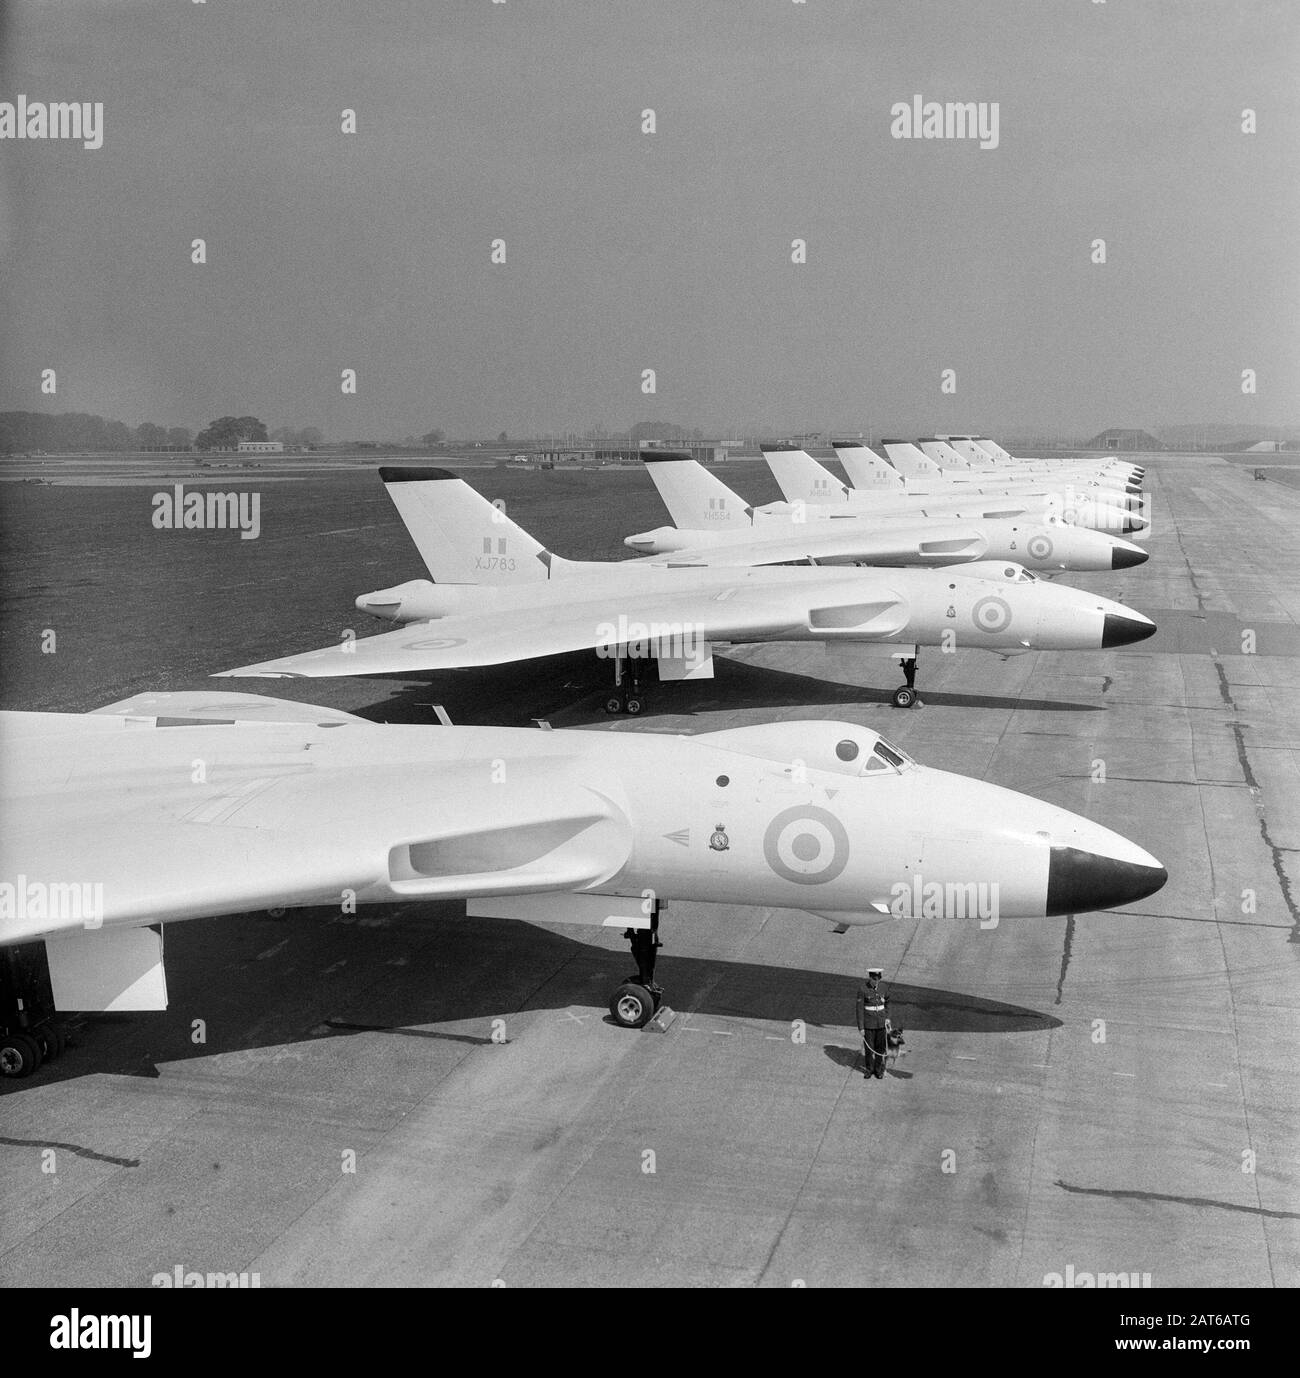 A line up of British Royal Air Force Avro Vulcan B.2 Bombers, taken at RAF Scampton on 11th May 1961. Aircraft include XJ783, XH554, XH563, XJ821, XH558. All painted in the all white anti-flash colour scheme. Stock Photo